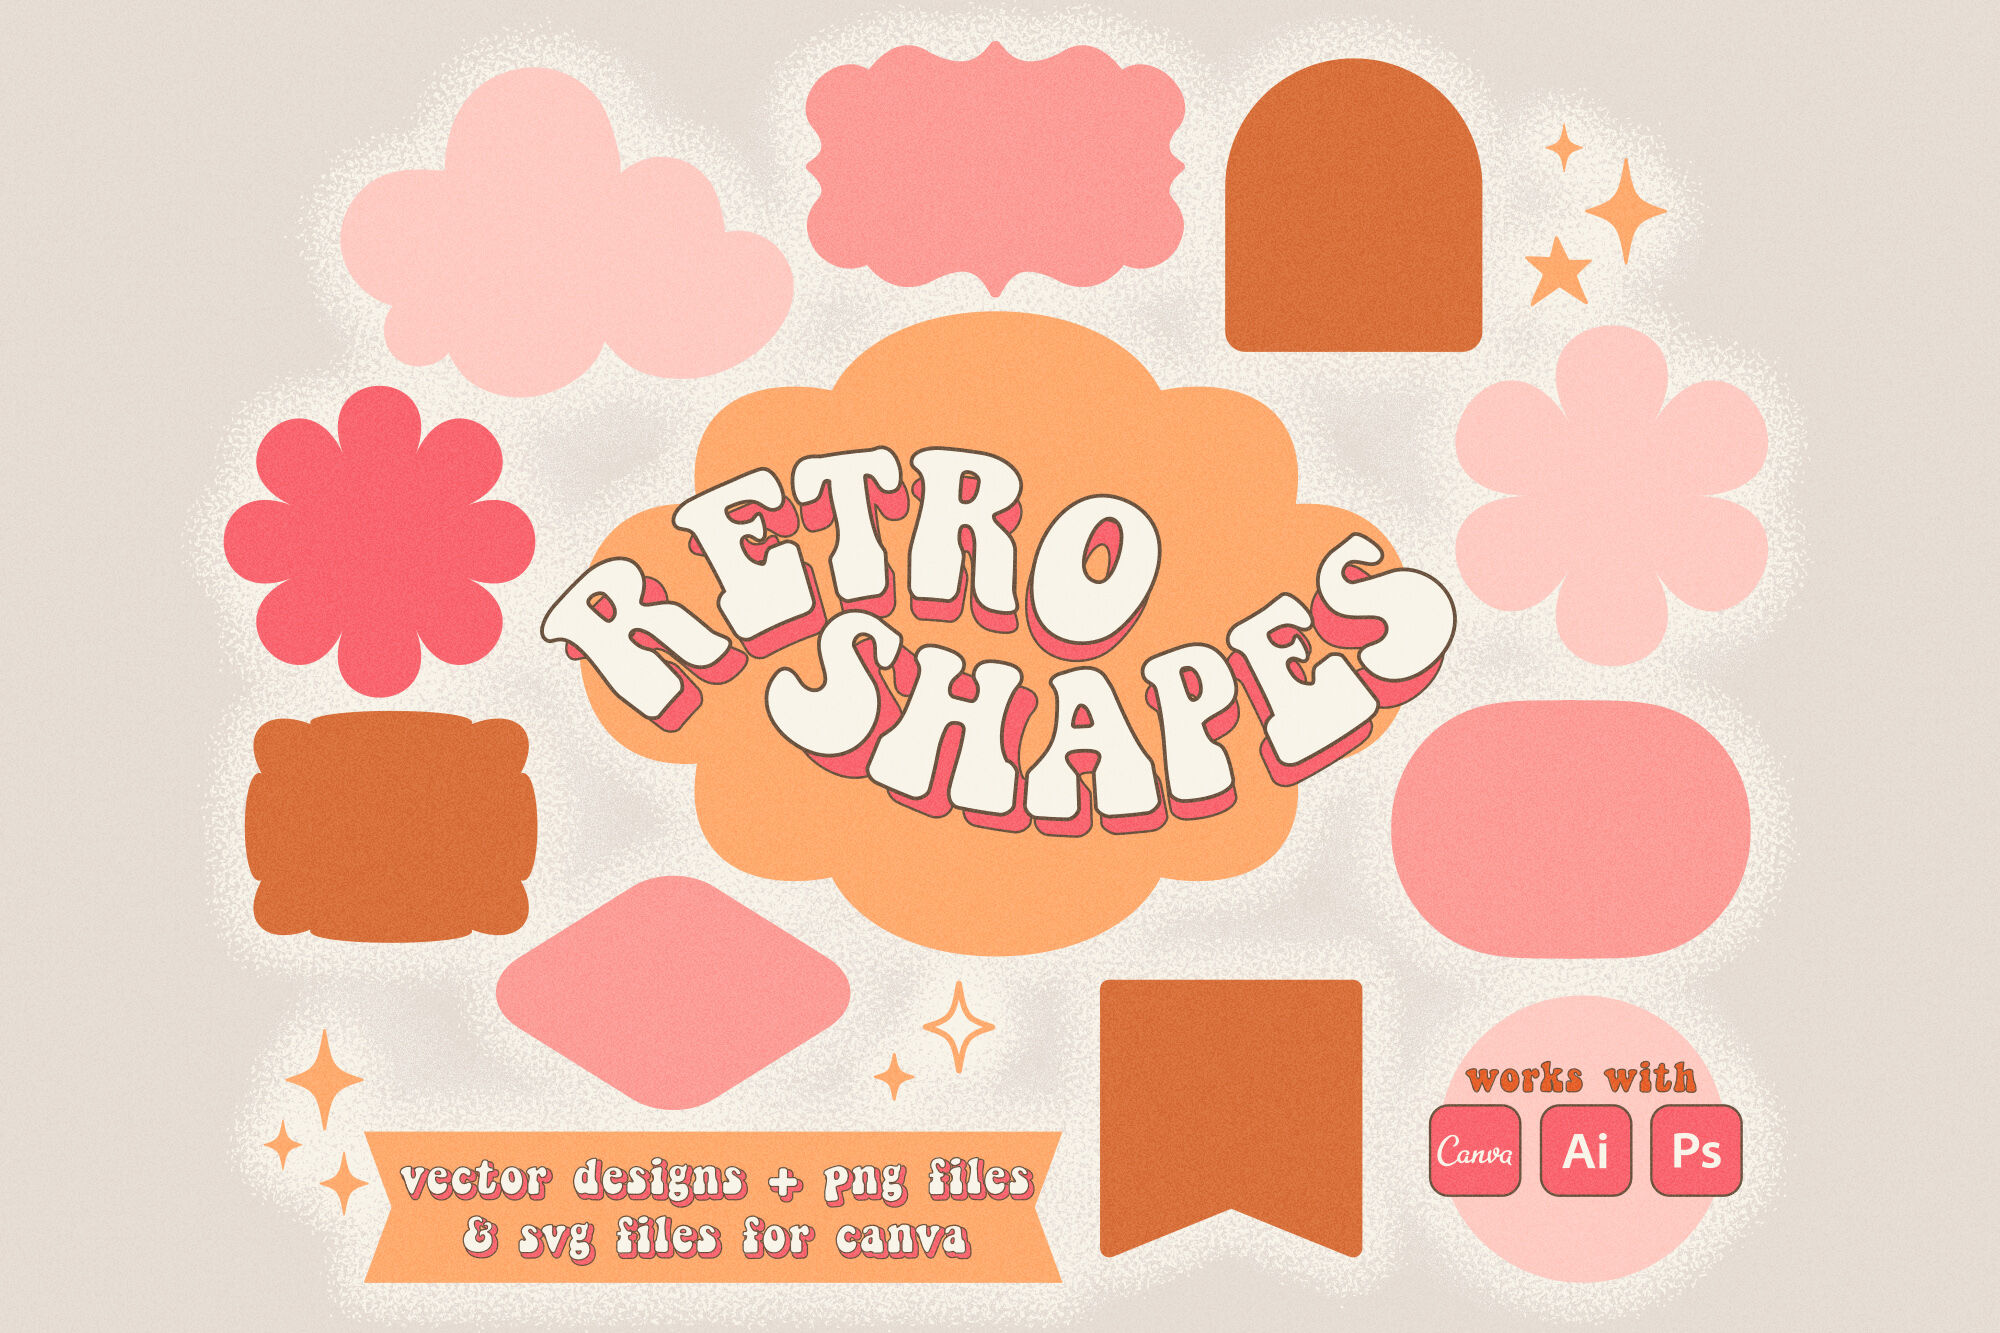 Retro Shape designs, Hippie clipart, Groovy Canva Elements, 70s graphi By  Summit Avenue | TheHungryJPEG